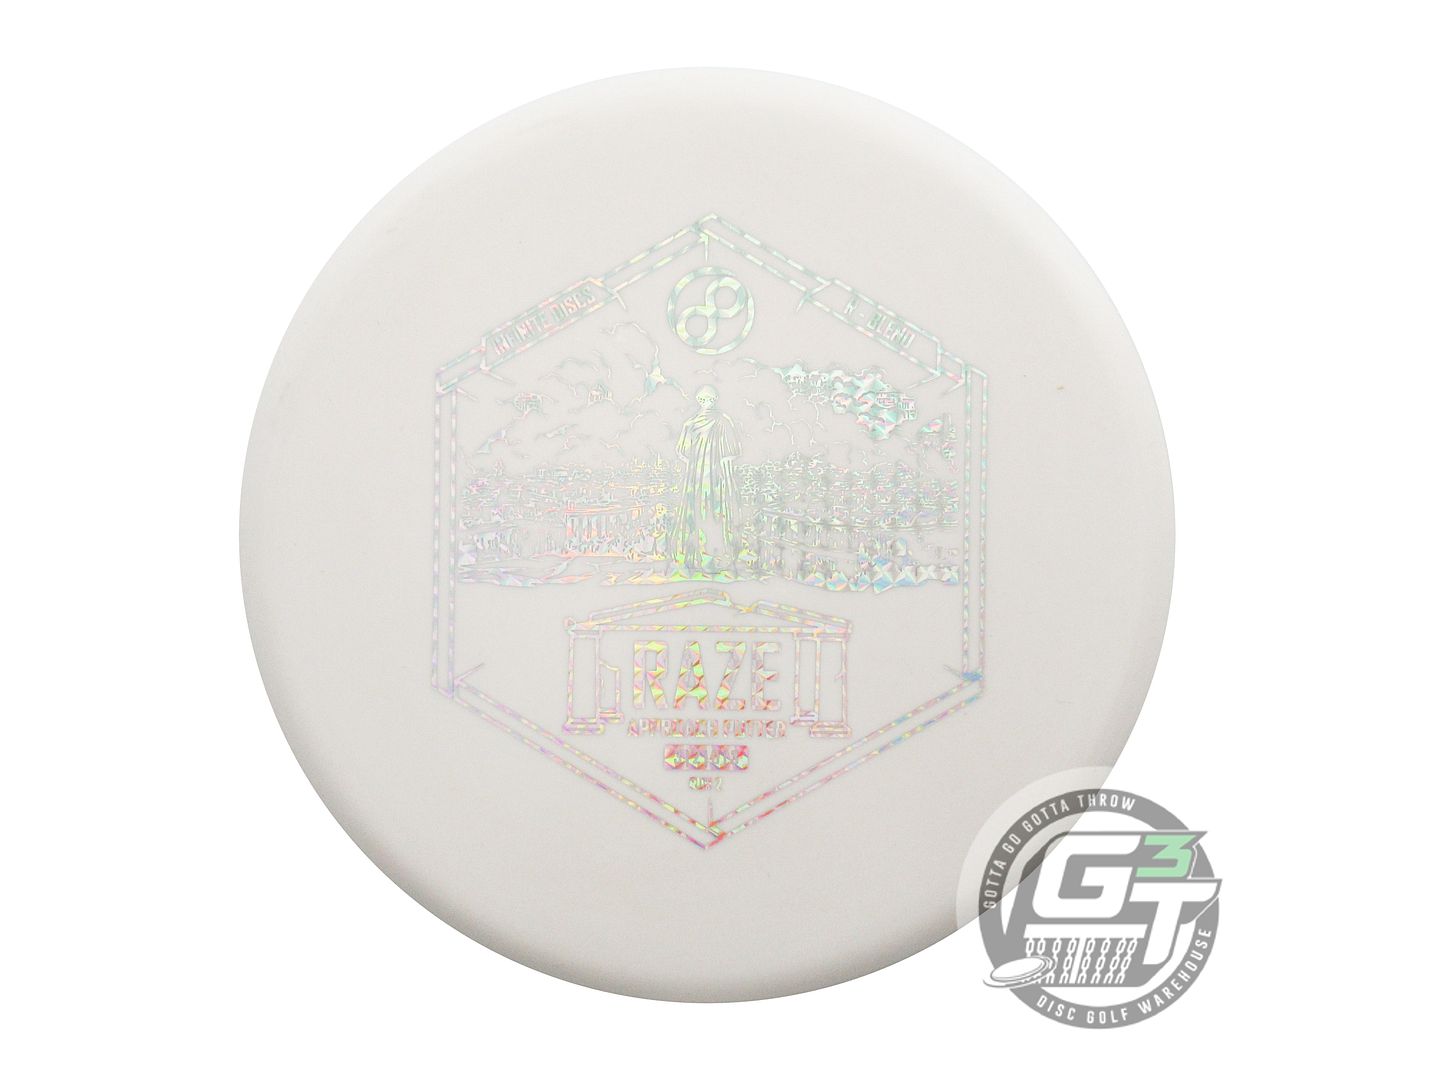 Infinite Discs R-Blend Raze Putter Golf Disc (Individually Listed)